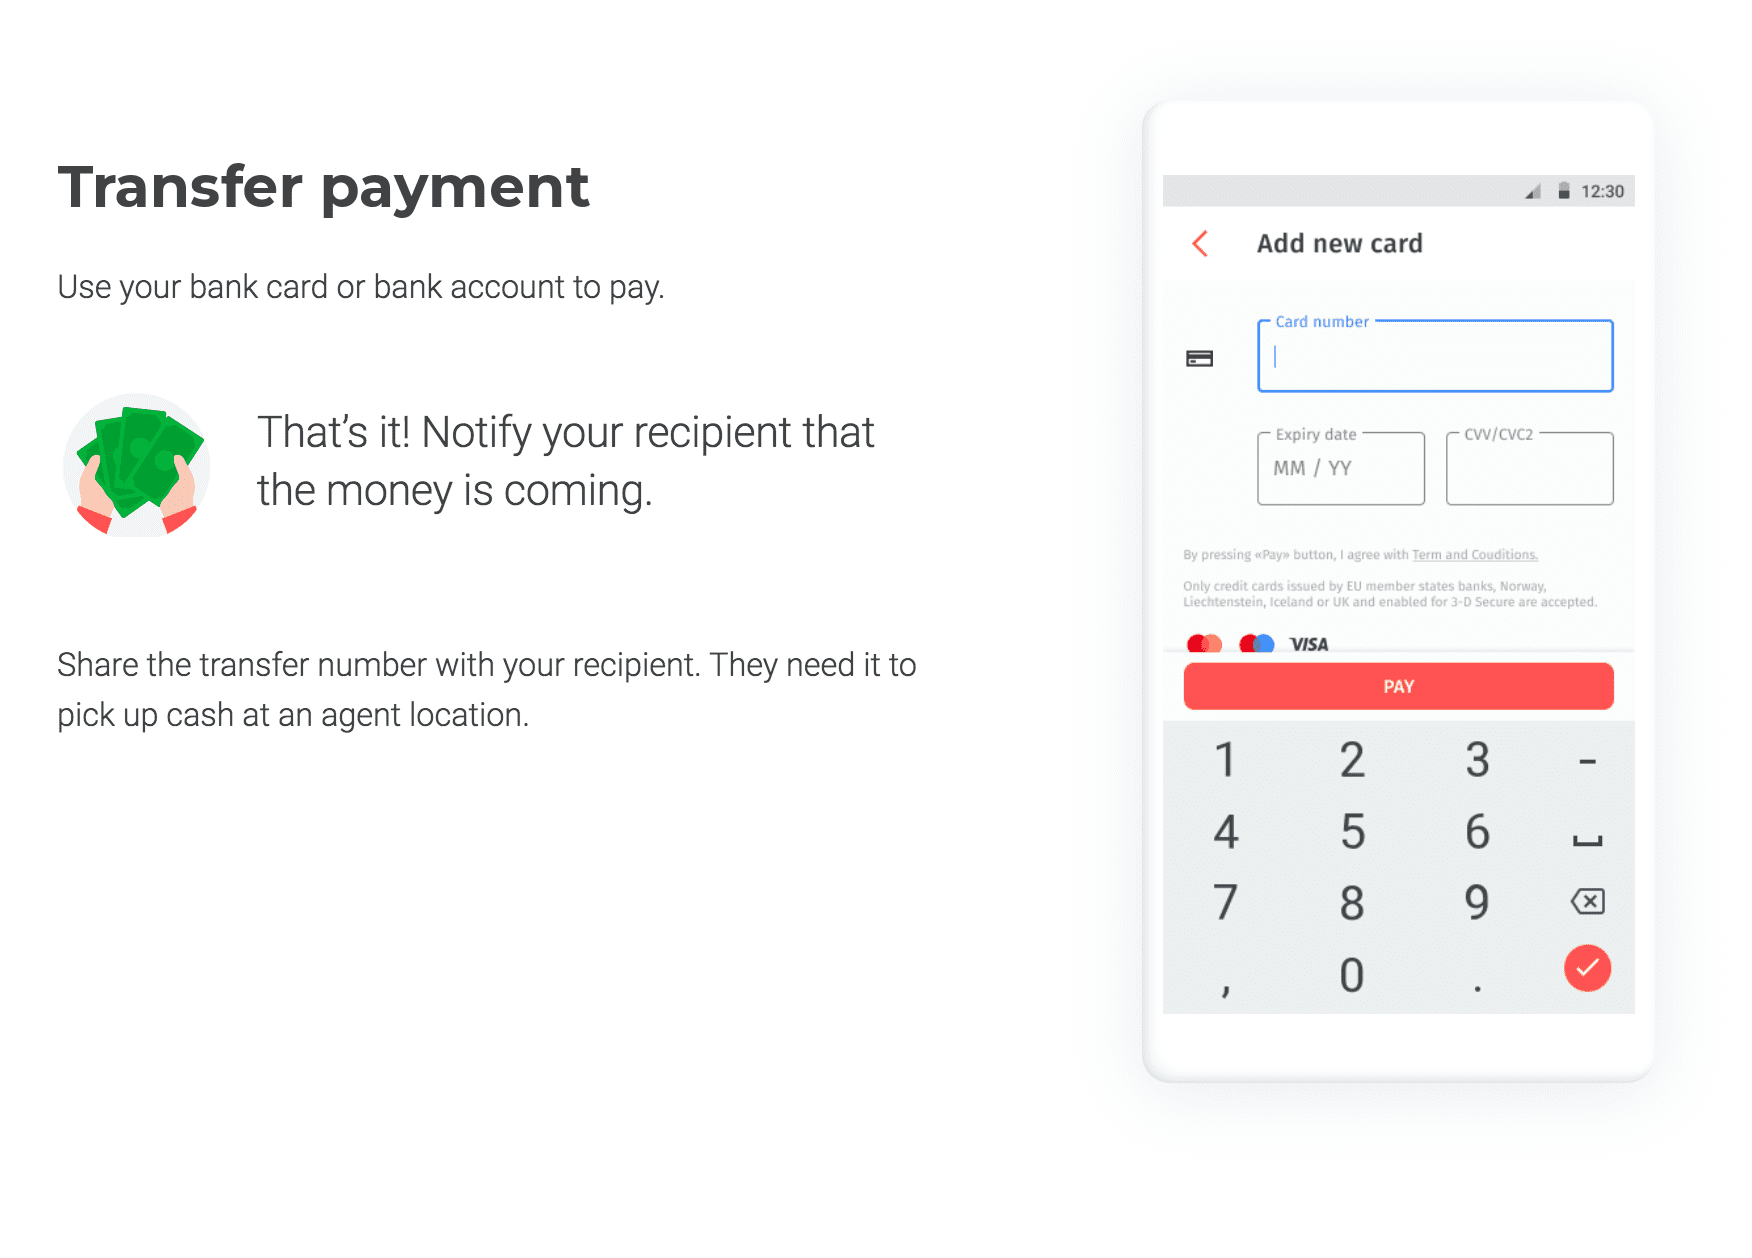 Pay with your card